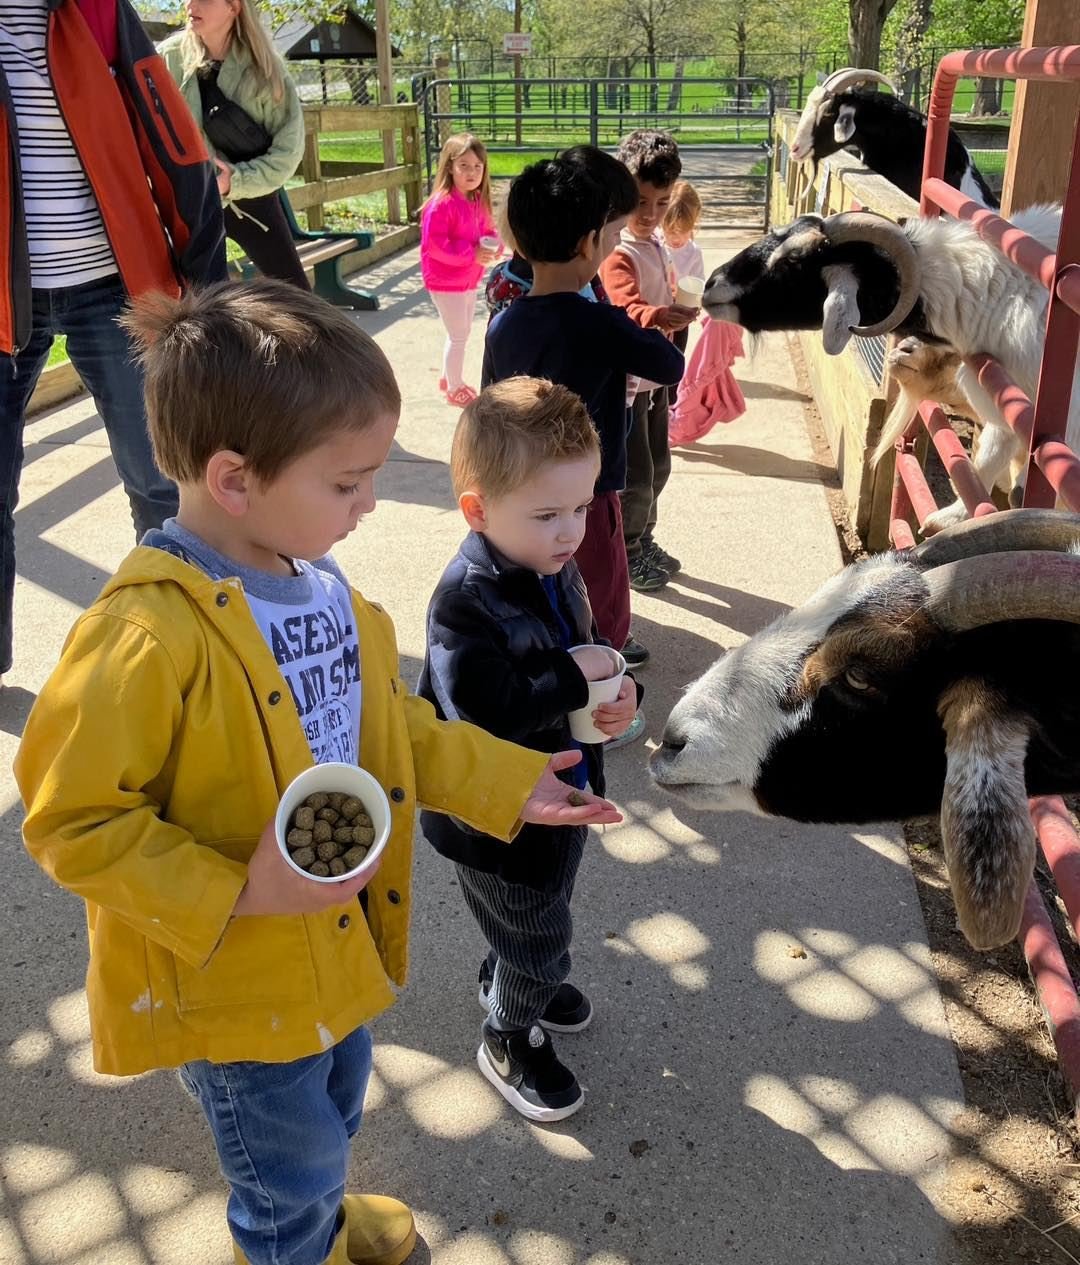 Yesterday our preprimary students got to experience another one of the MCH field trips. We visited Randal Oaks Zoo and had a wonderful time seeing and interacting with all the animals! We&rsquo;re looking forward to the next adventure and another sch